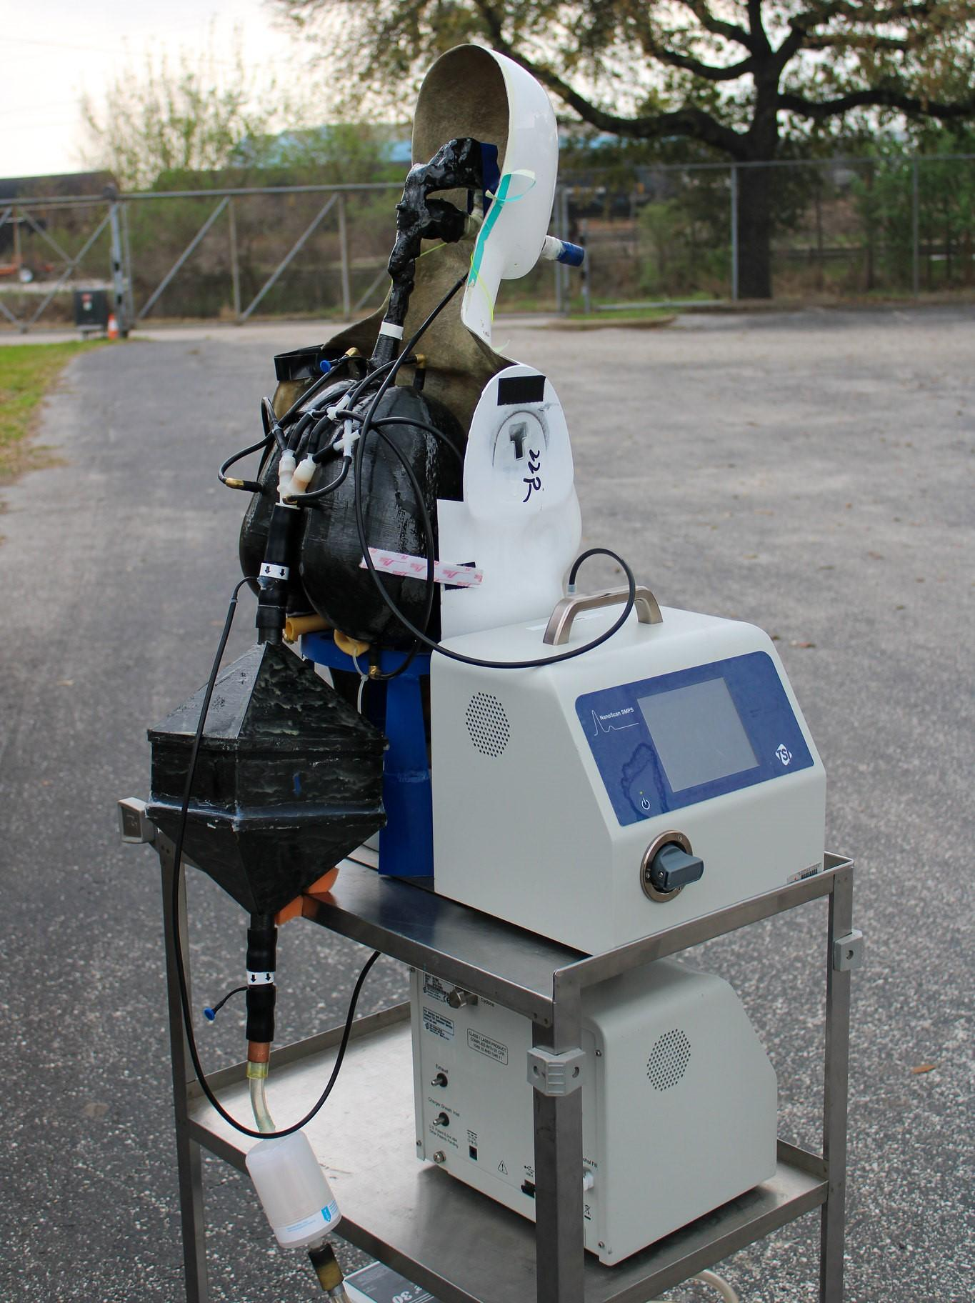 Placed on a trolley and powered by batteries, MALDA is fully mobile and ready to measure aerosol that is present in the community or workplace air. (Photo by UTHealth Houston)